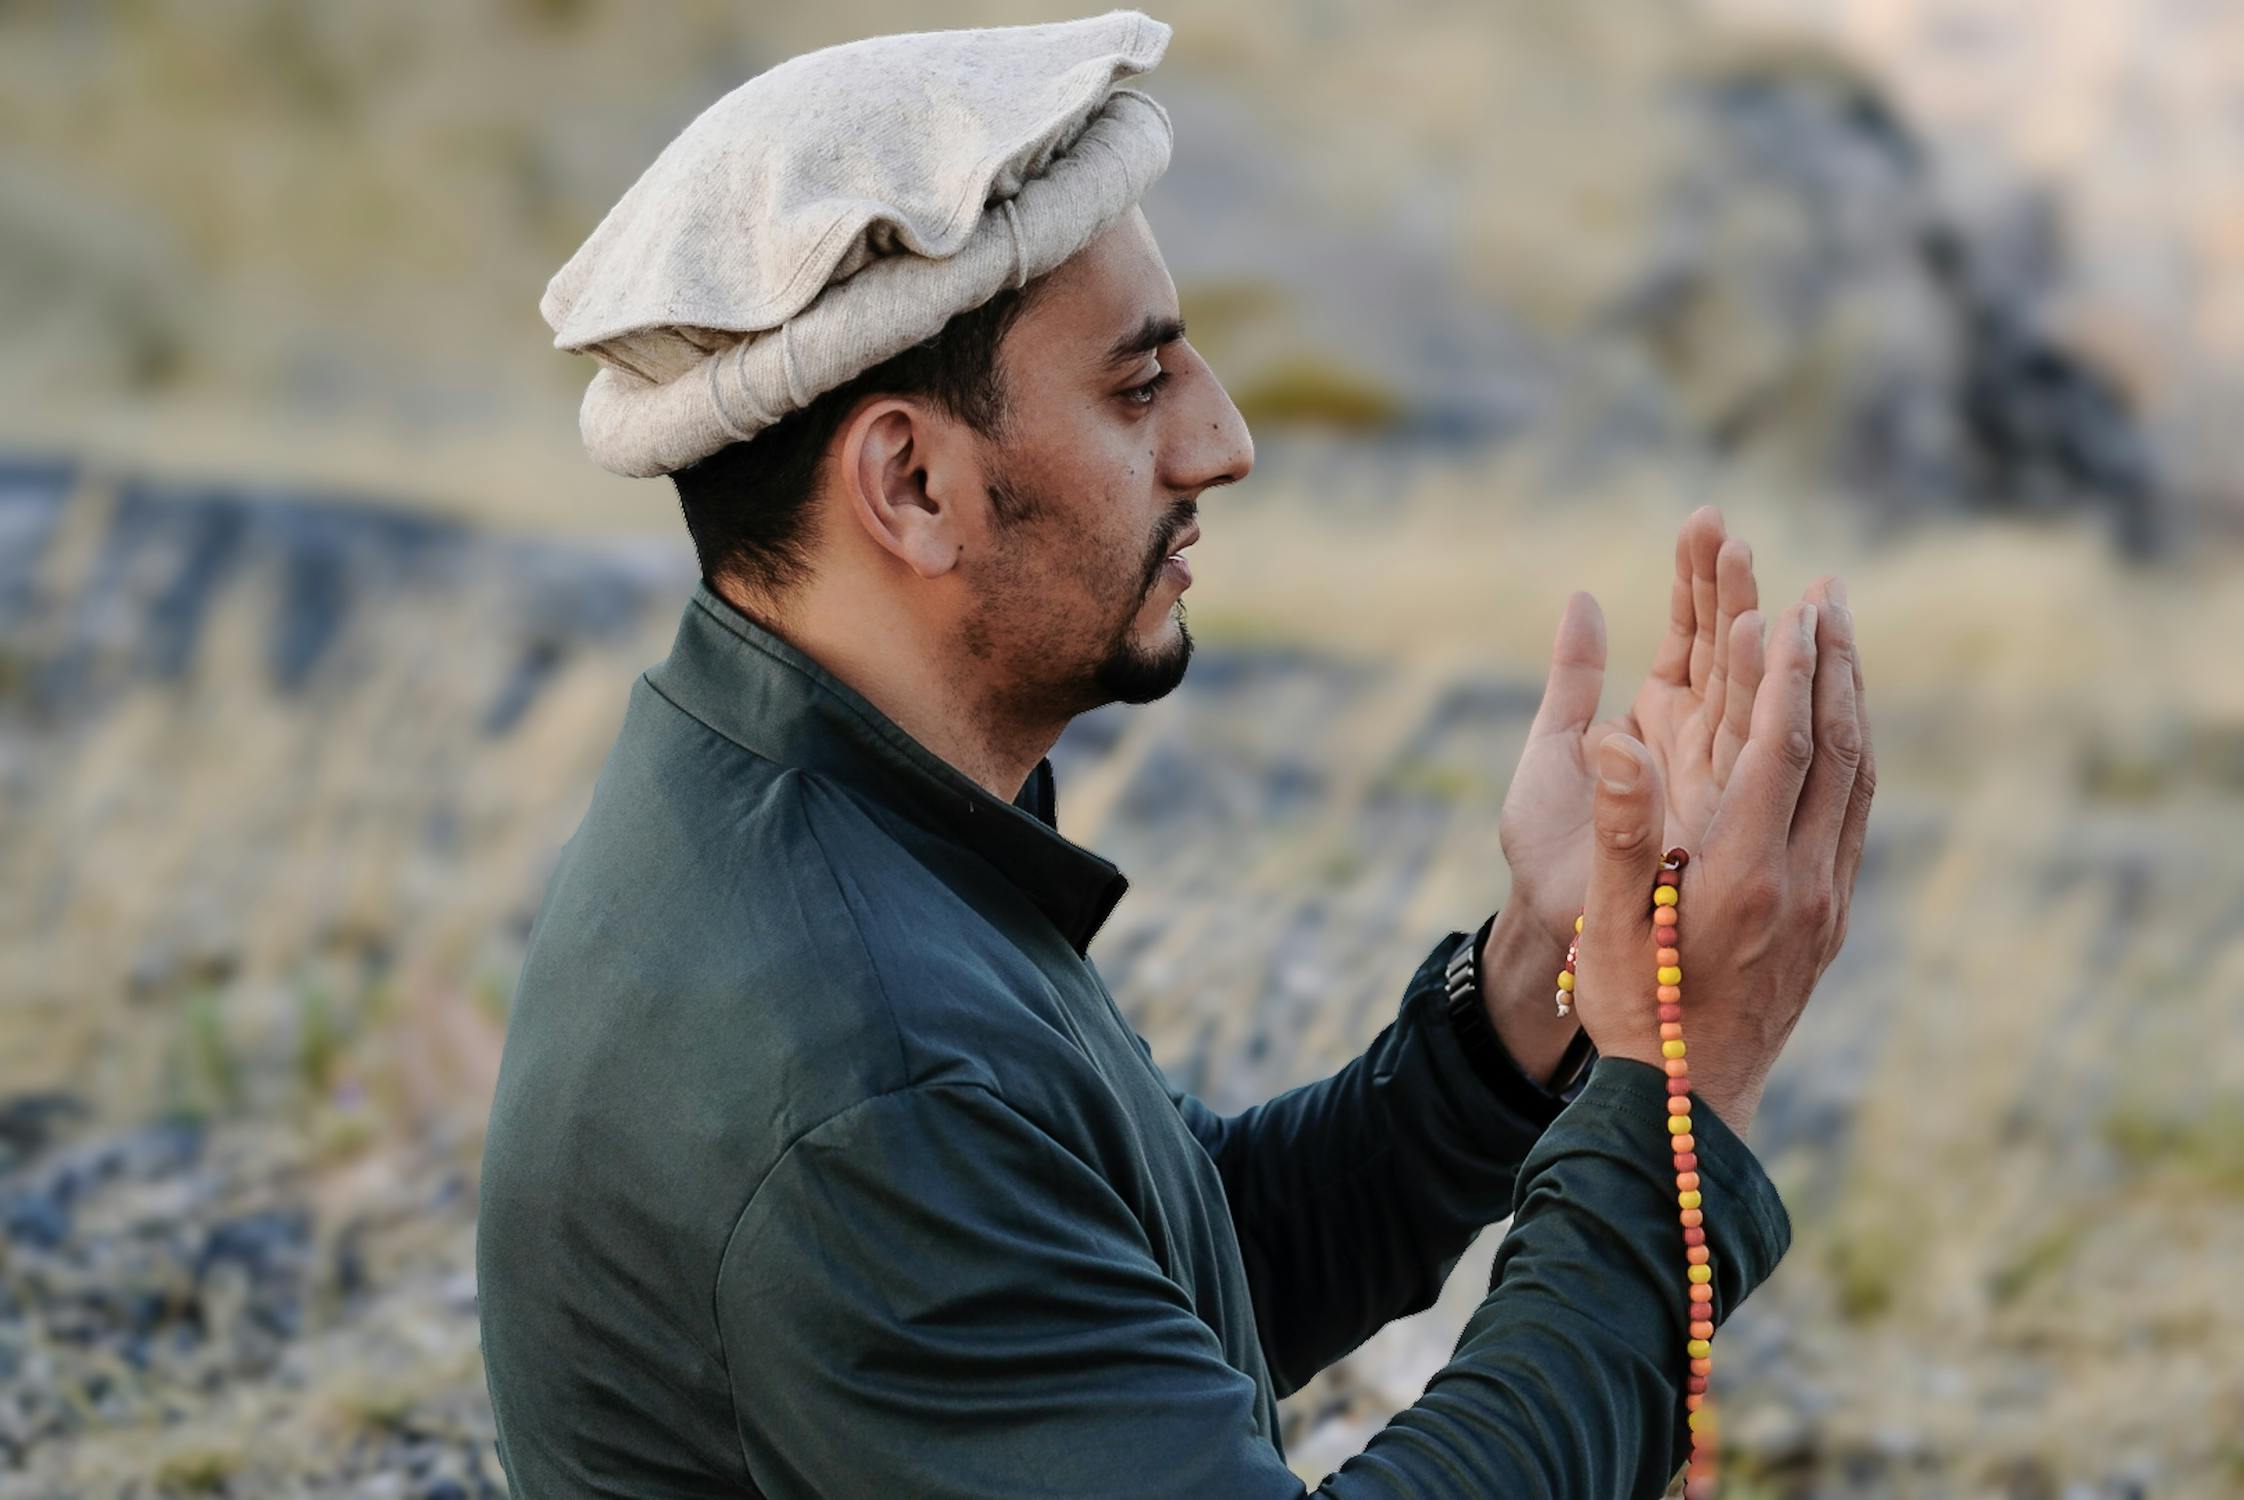 Closeup of a Man Wearing Traditional Clothing, Praying with a Rosary ...